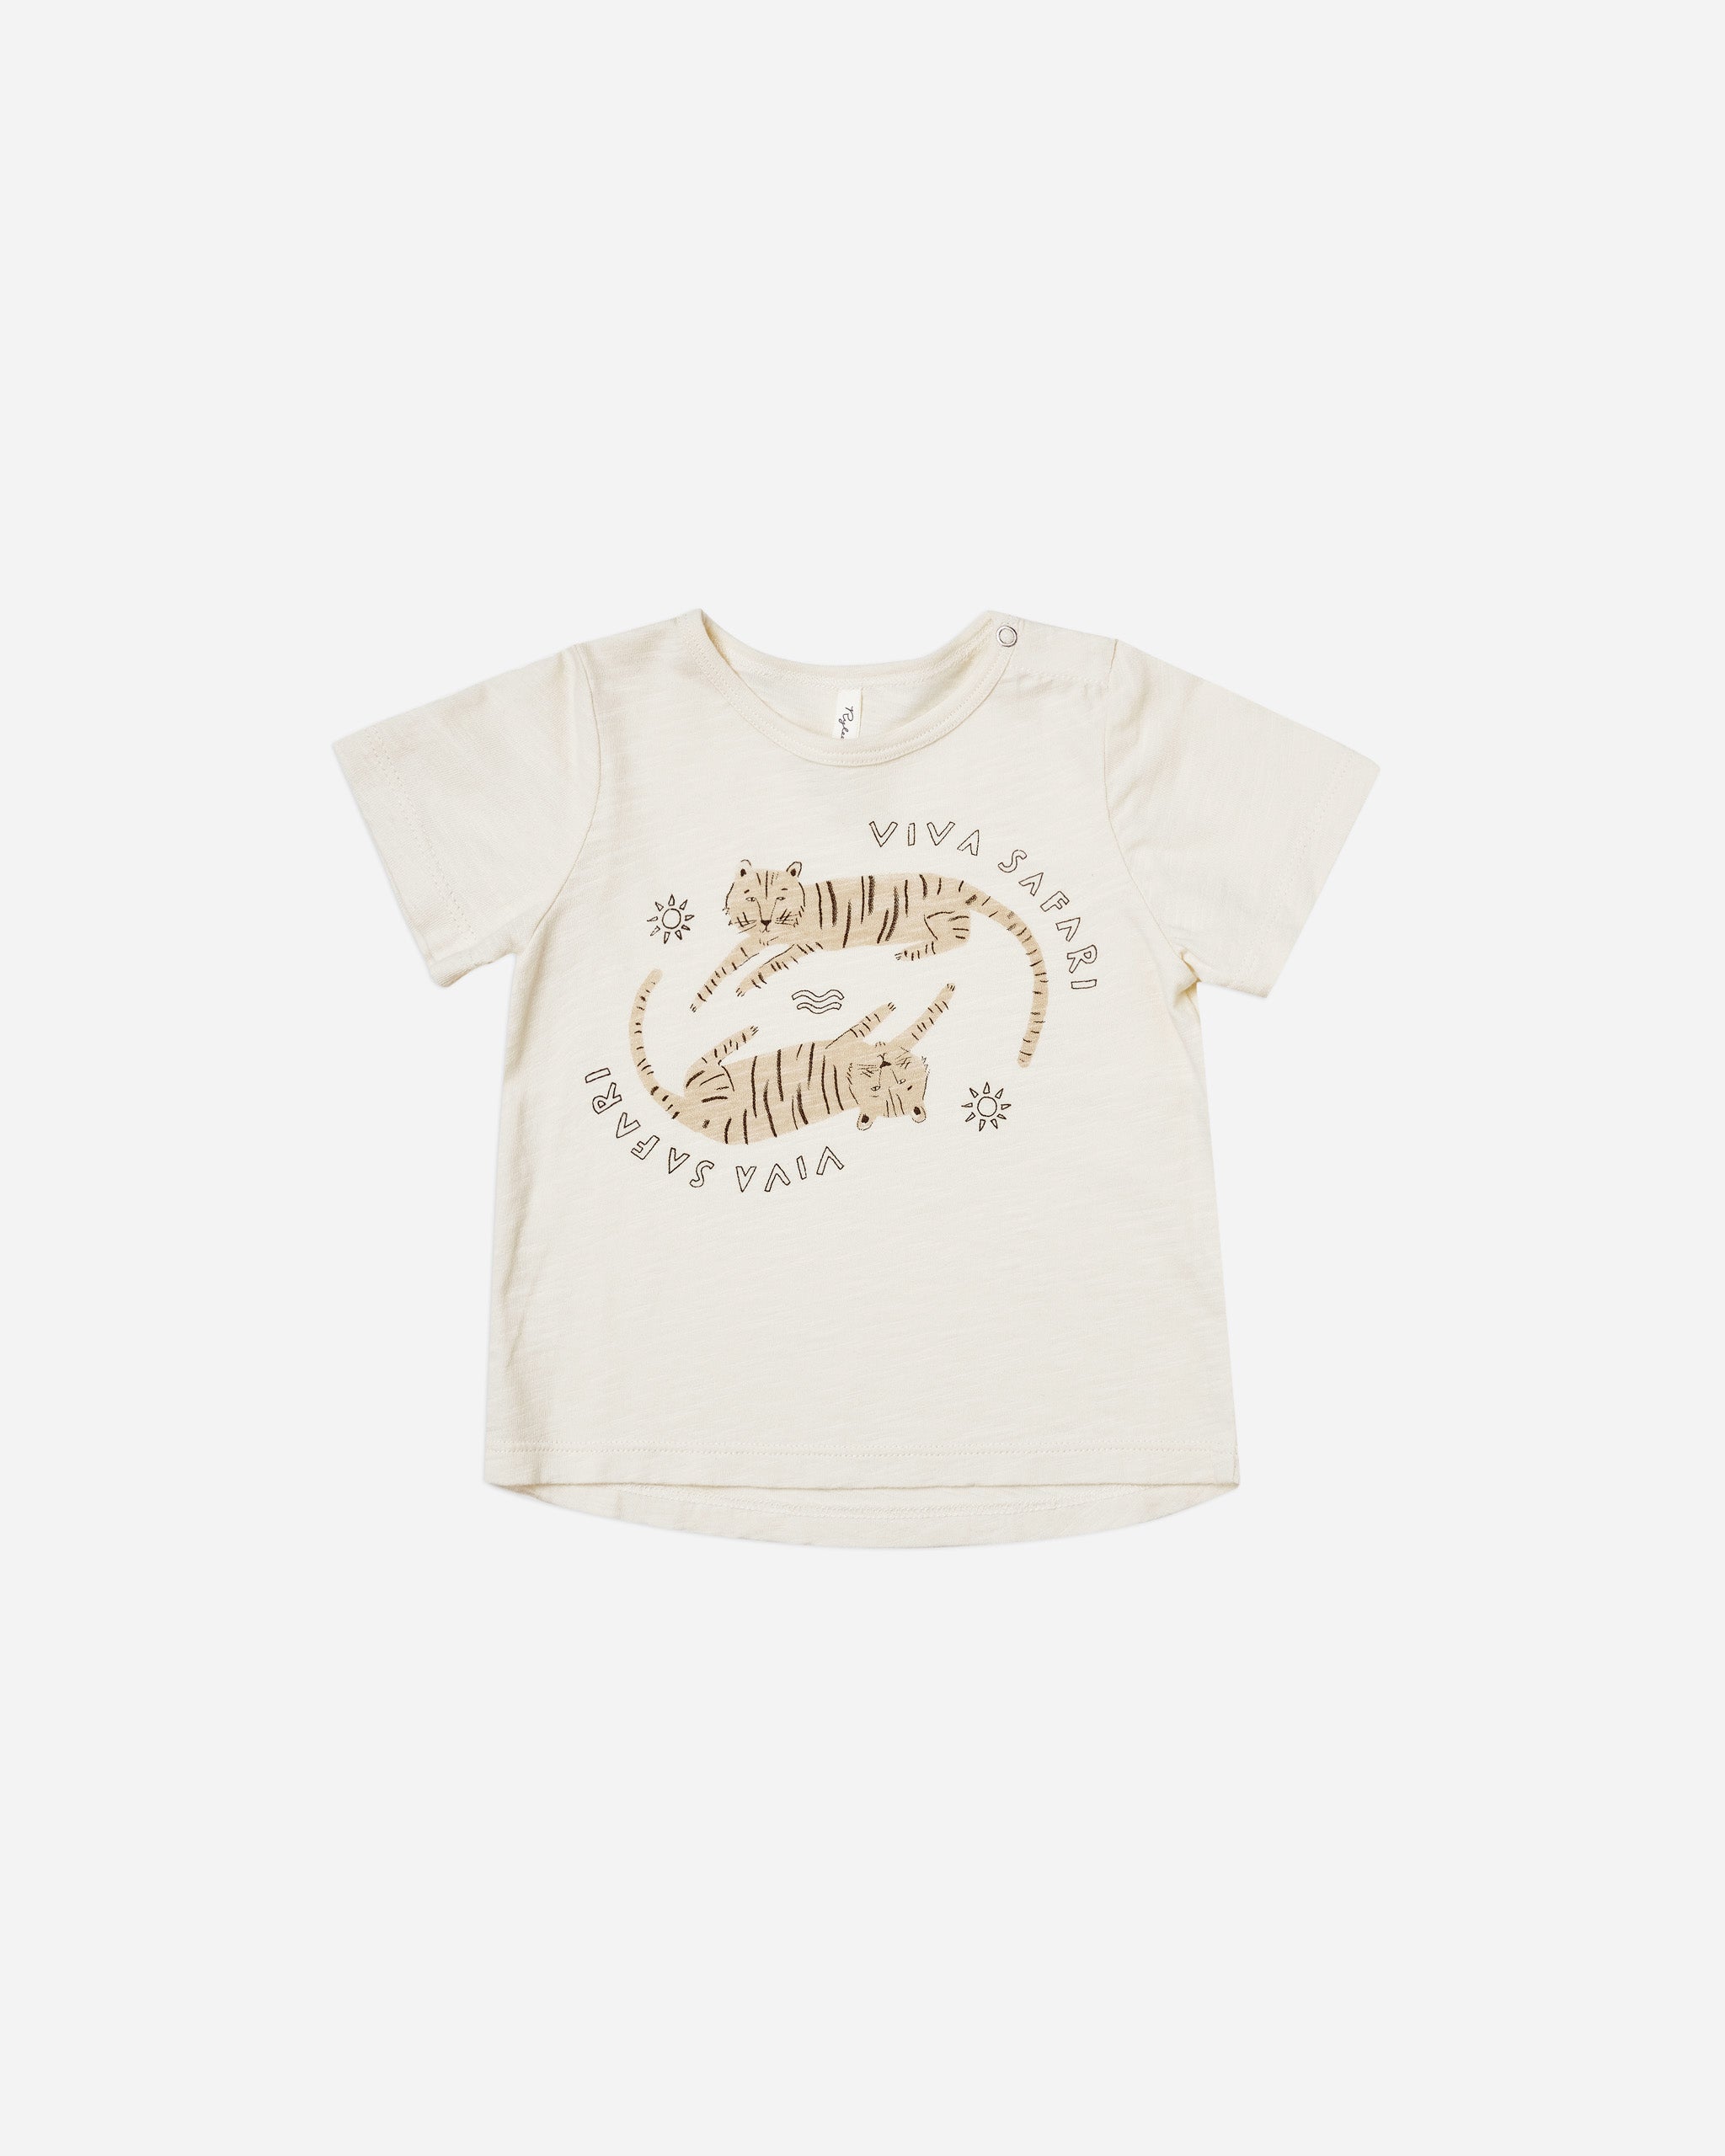 basic tee || viva safari - Rylee + Cru | Kids Clothes | Trendy Baby Clothes | Modern Infant Outfits |